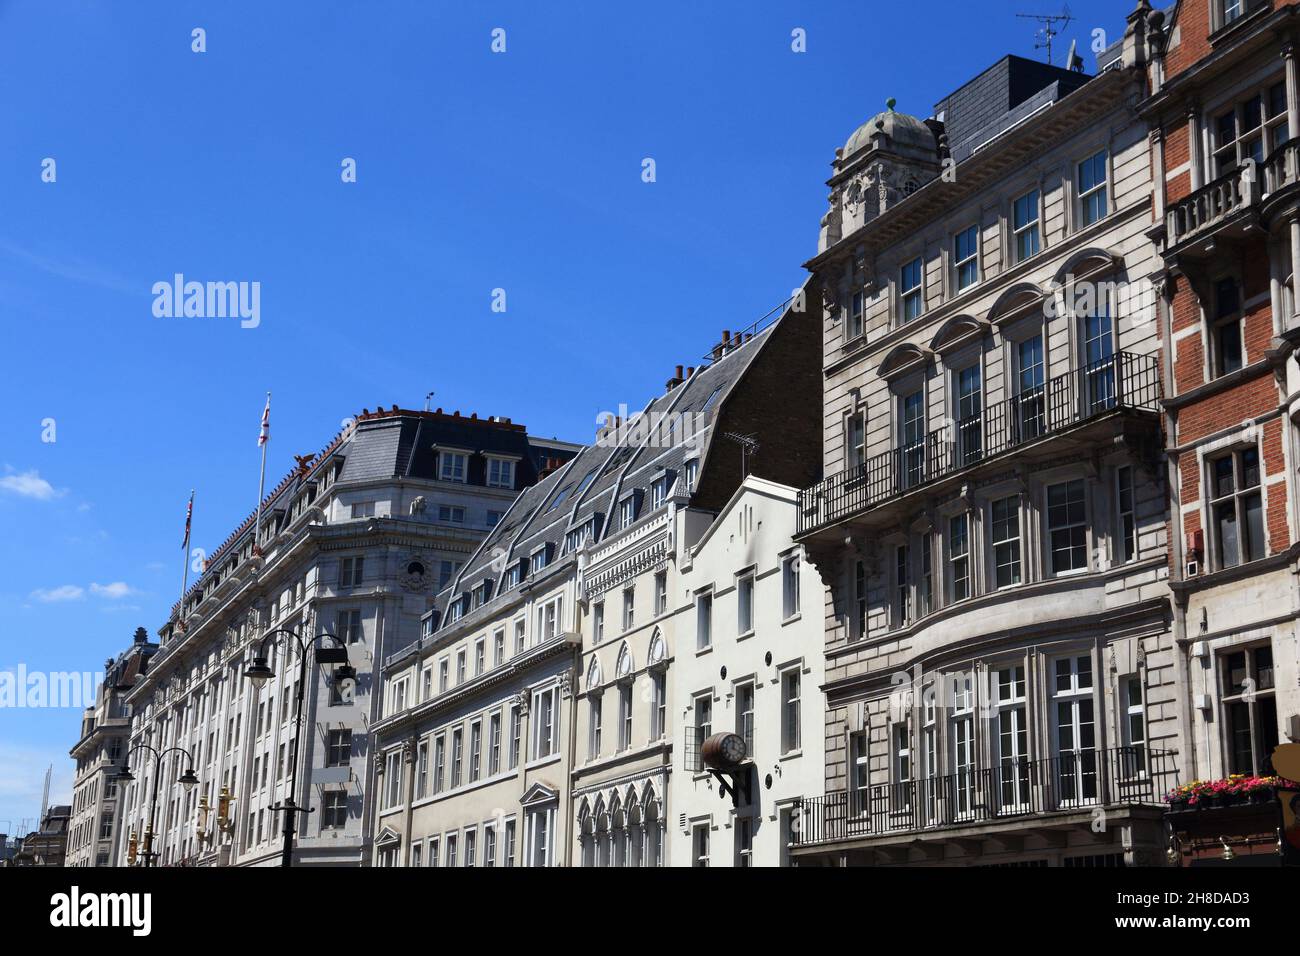 The Strand in London, UK. Famous street. Stock Photo